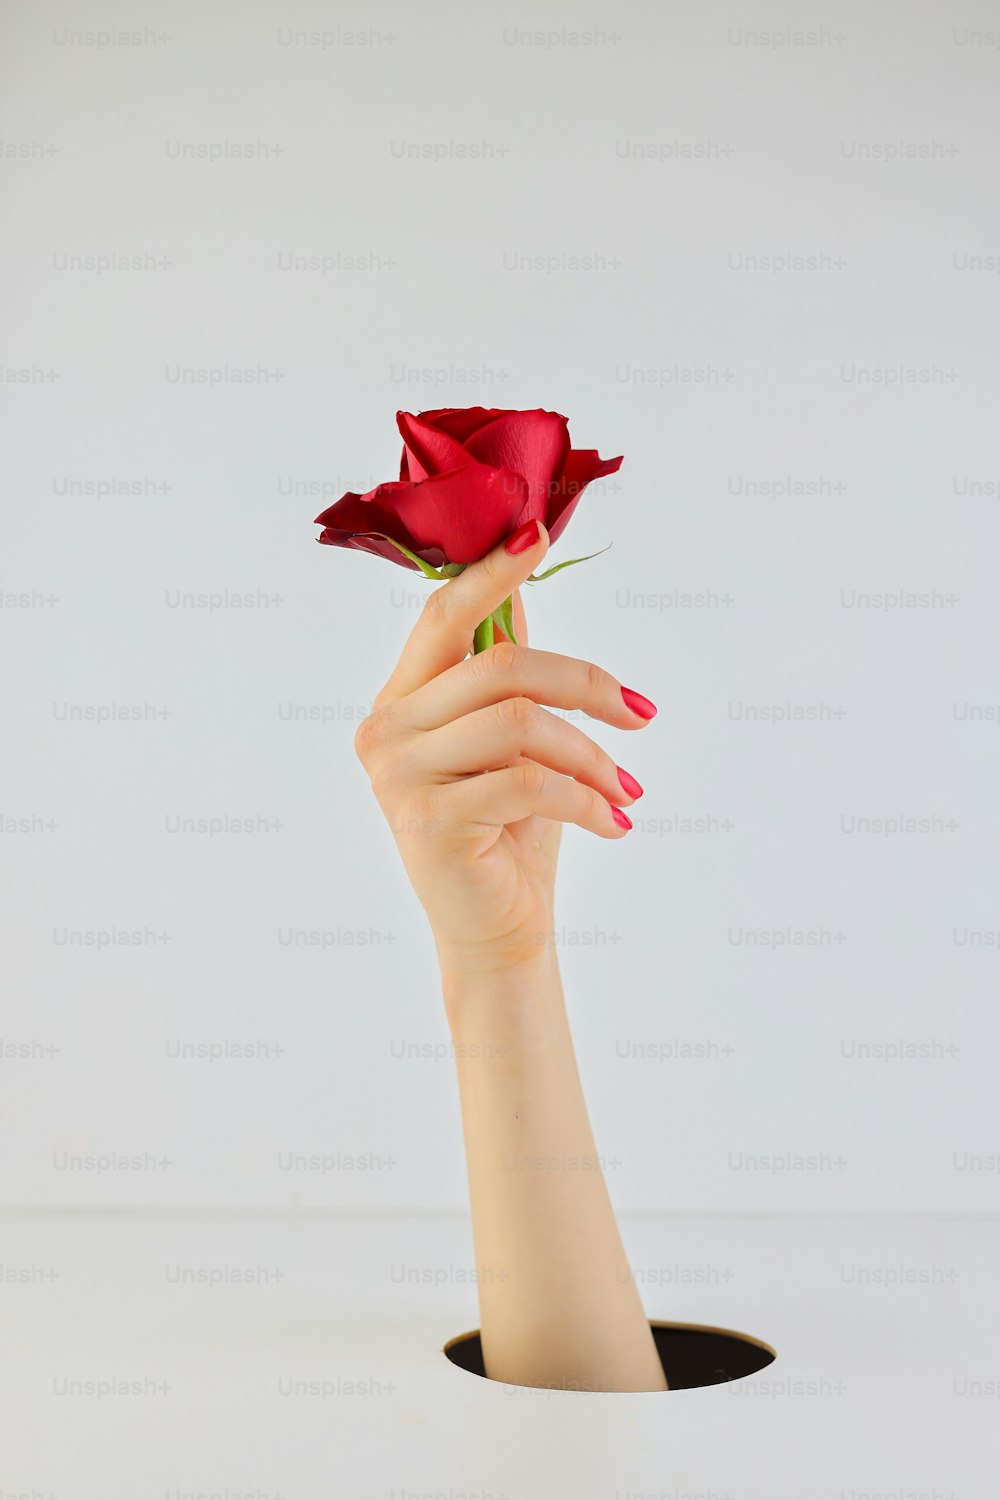 A woman's hand holding a single red rose photo – Rose Image on ...